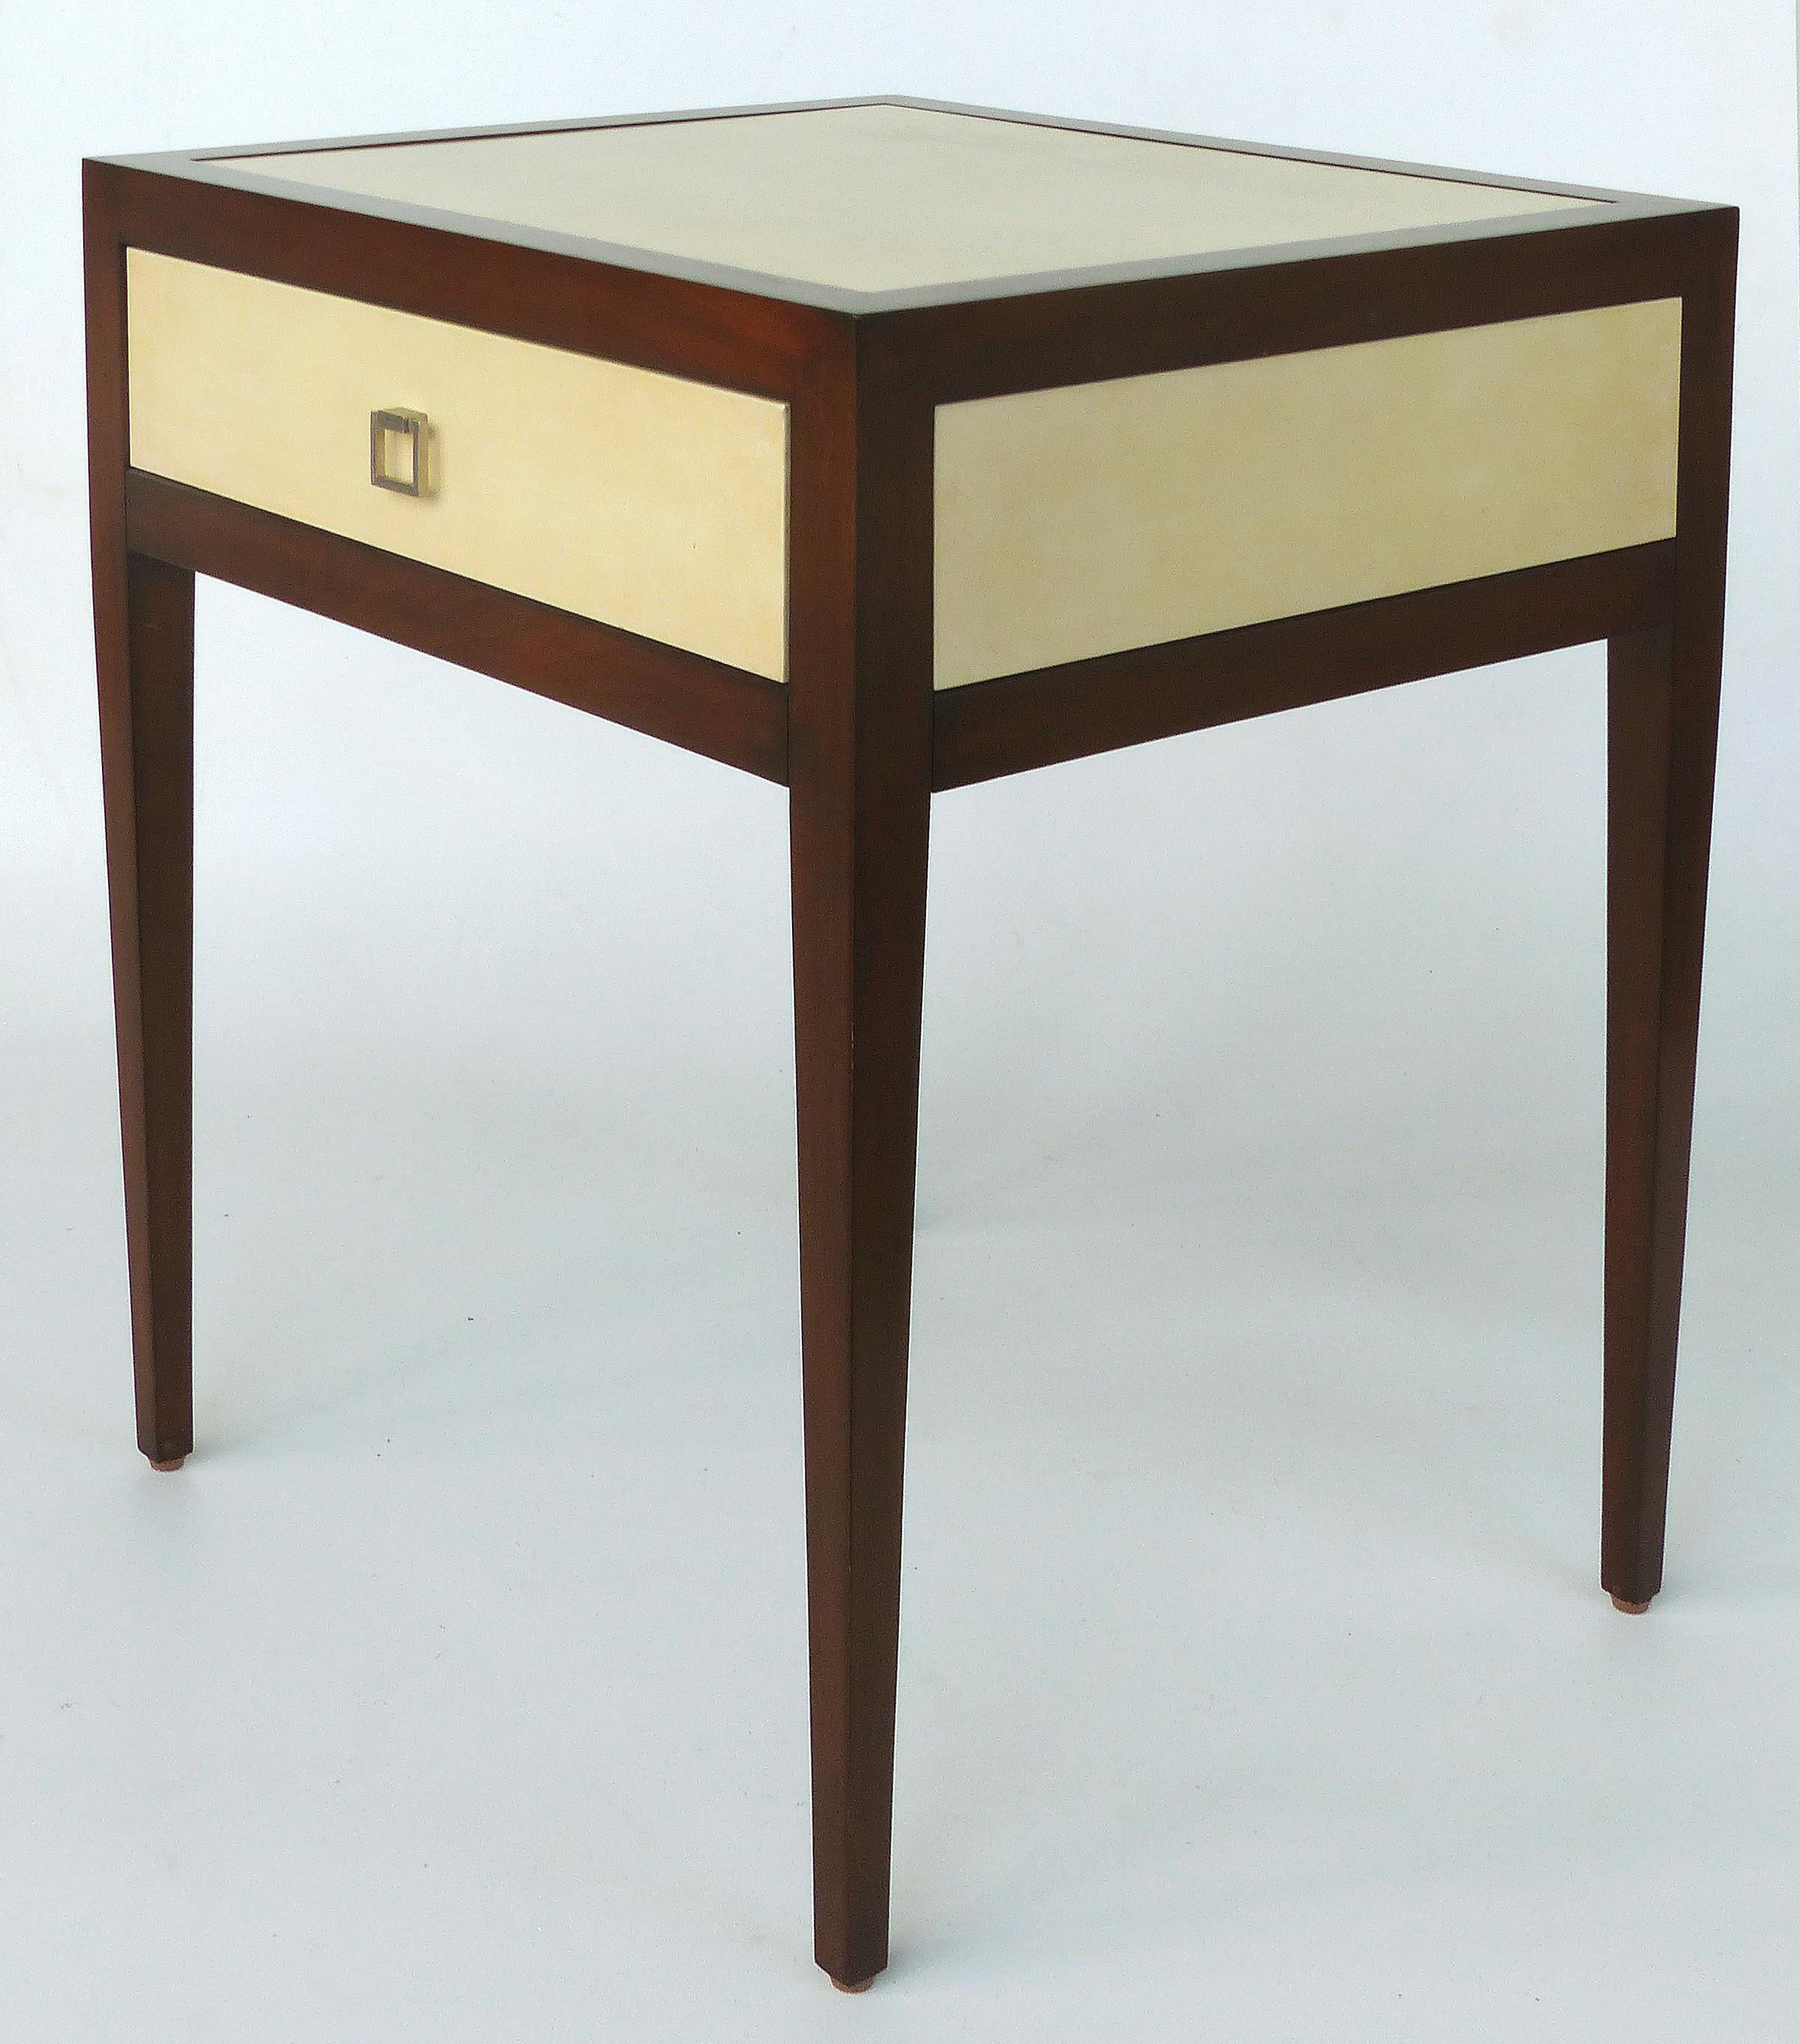 Williams and Sonoma Home Mahogany and Parchment Side Table

Offered for sale is a Williams and Sonoma Home mahogany and parchment side table. The table has inset parchment panels on all side and on the top. It has a single drawer with chrome